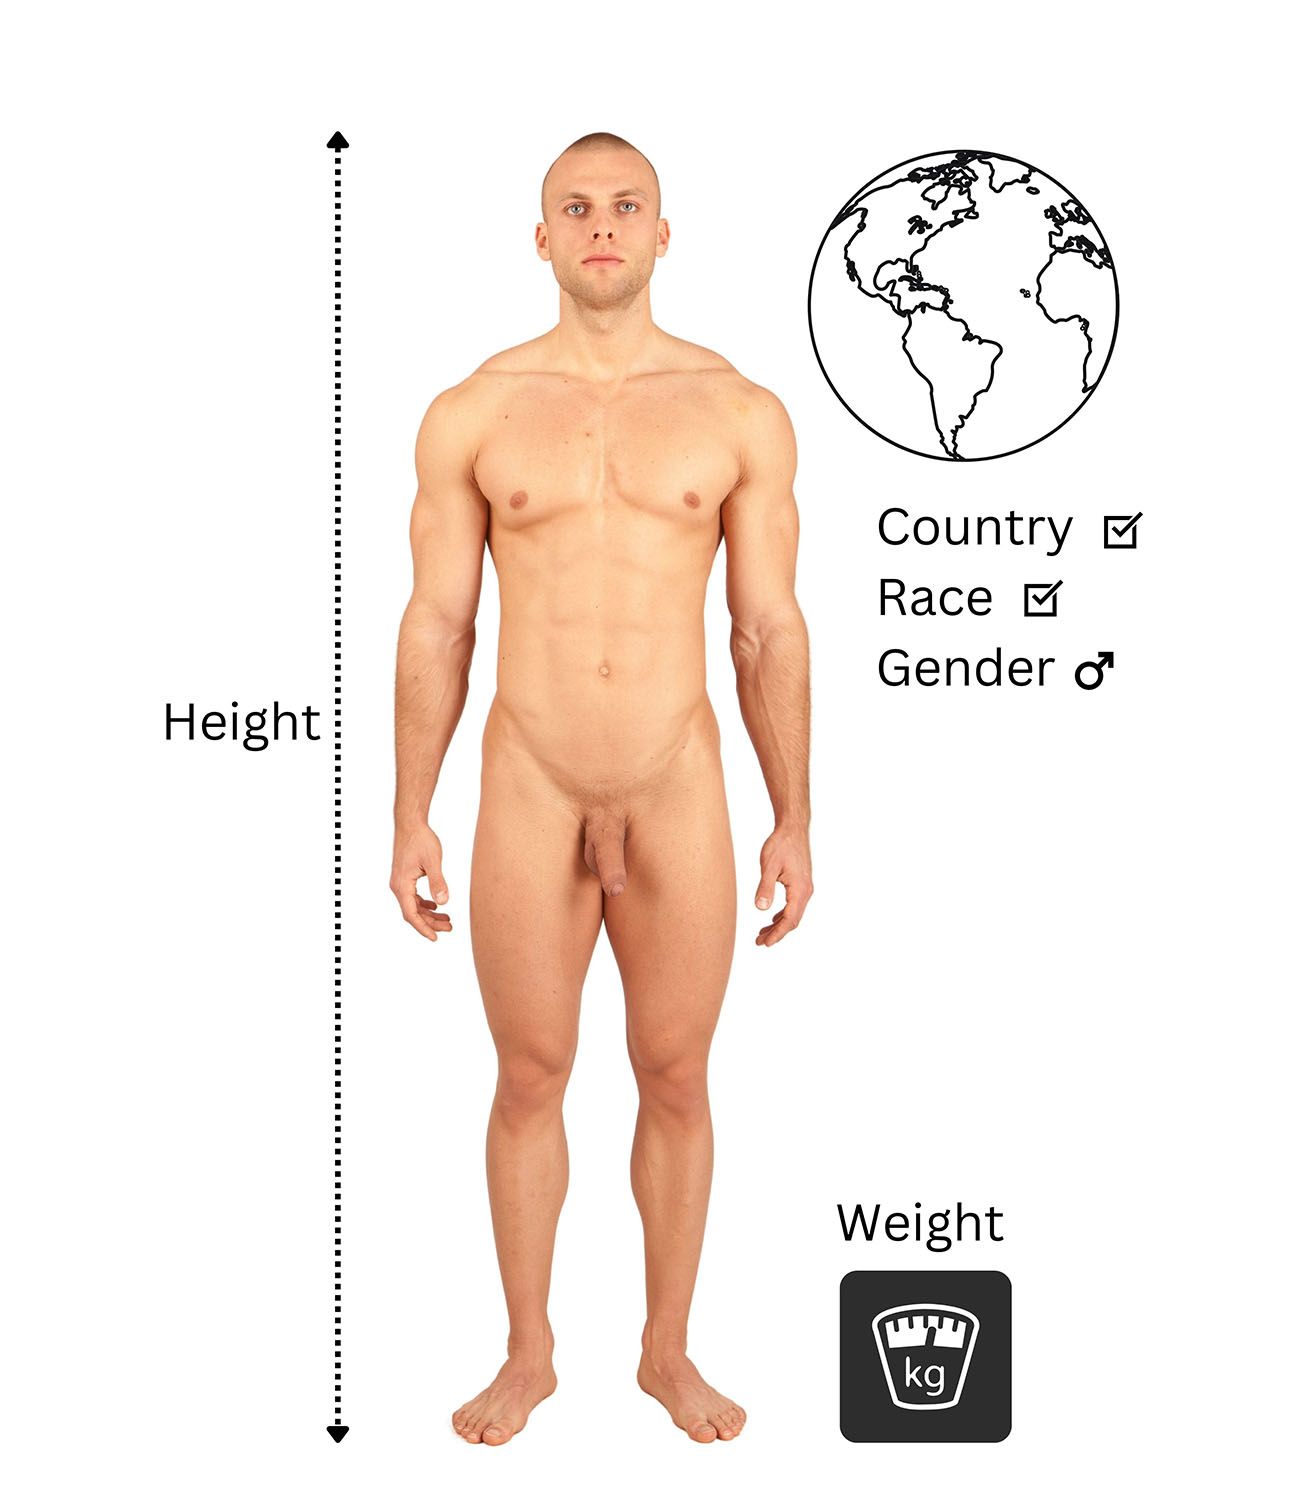 Nude man measuring his height, weight and ethnic background.